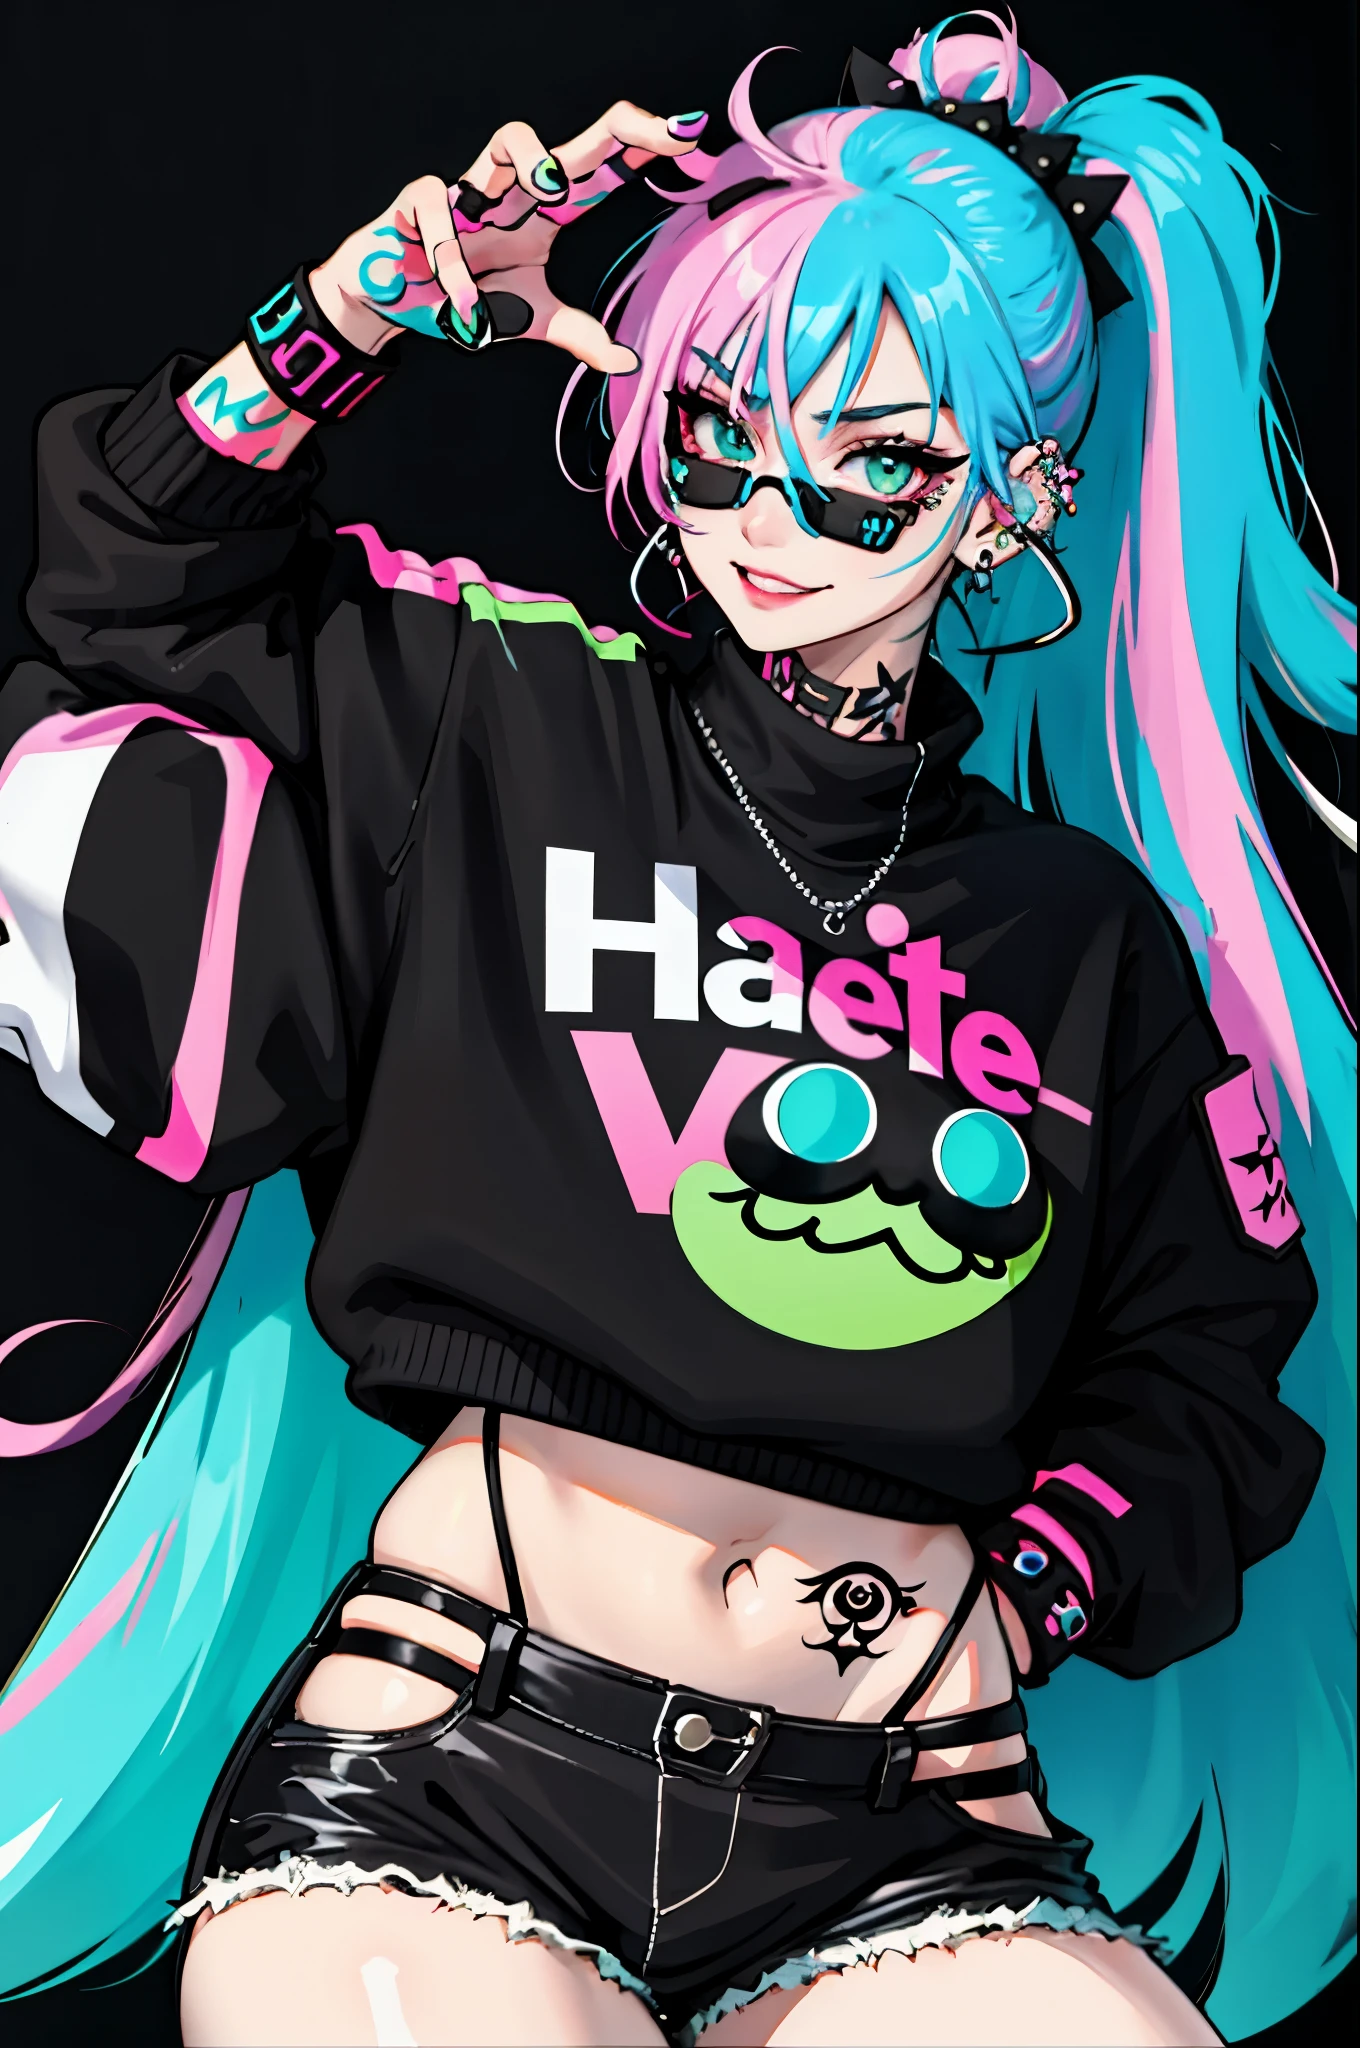 kpop girl with rizz smile face, bad ass, black gloves, bobba shake, neon cyan pink hair, tattoos on hands and neck, piercing, black mixed green striped oversized tomboy ish sweater, cool badass pose, smoke background, colorful smoke background